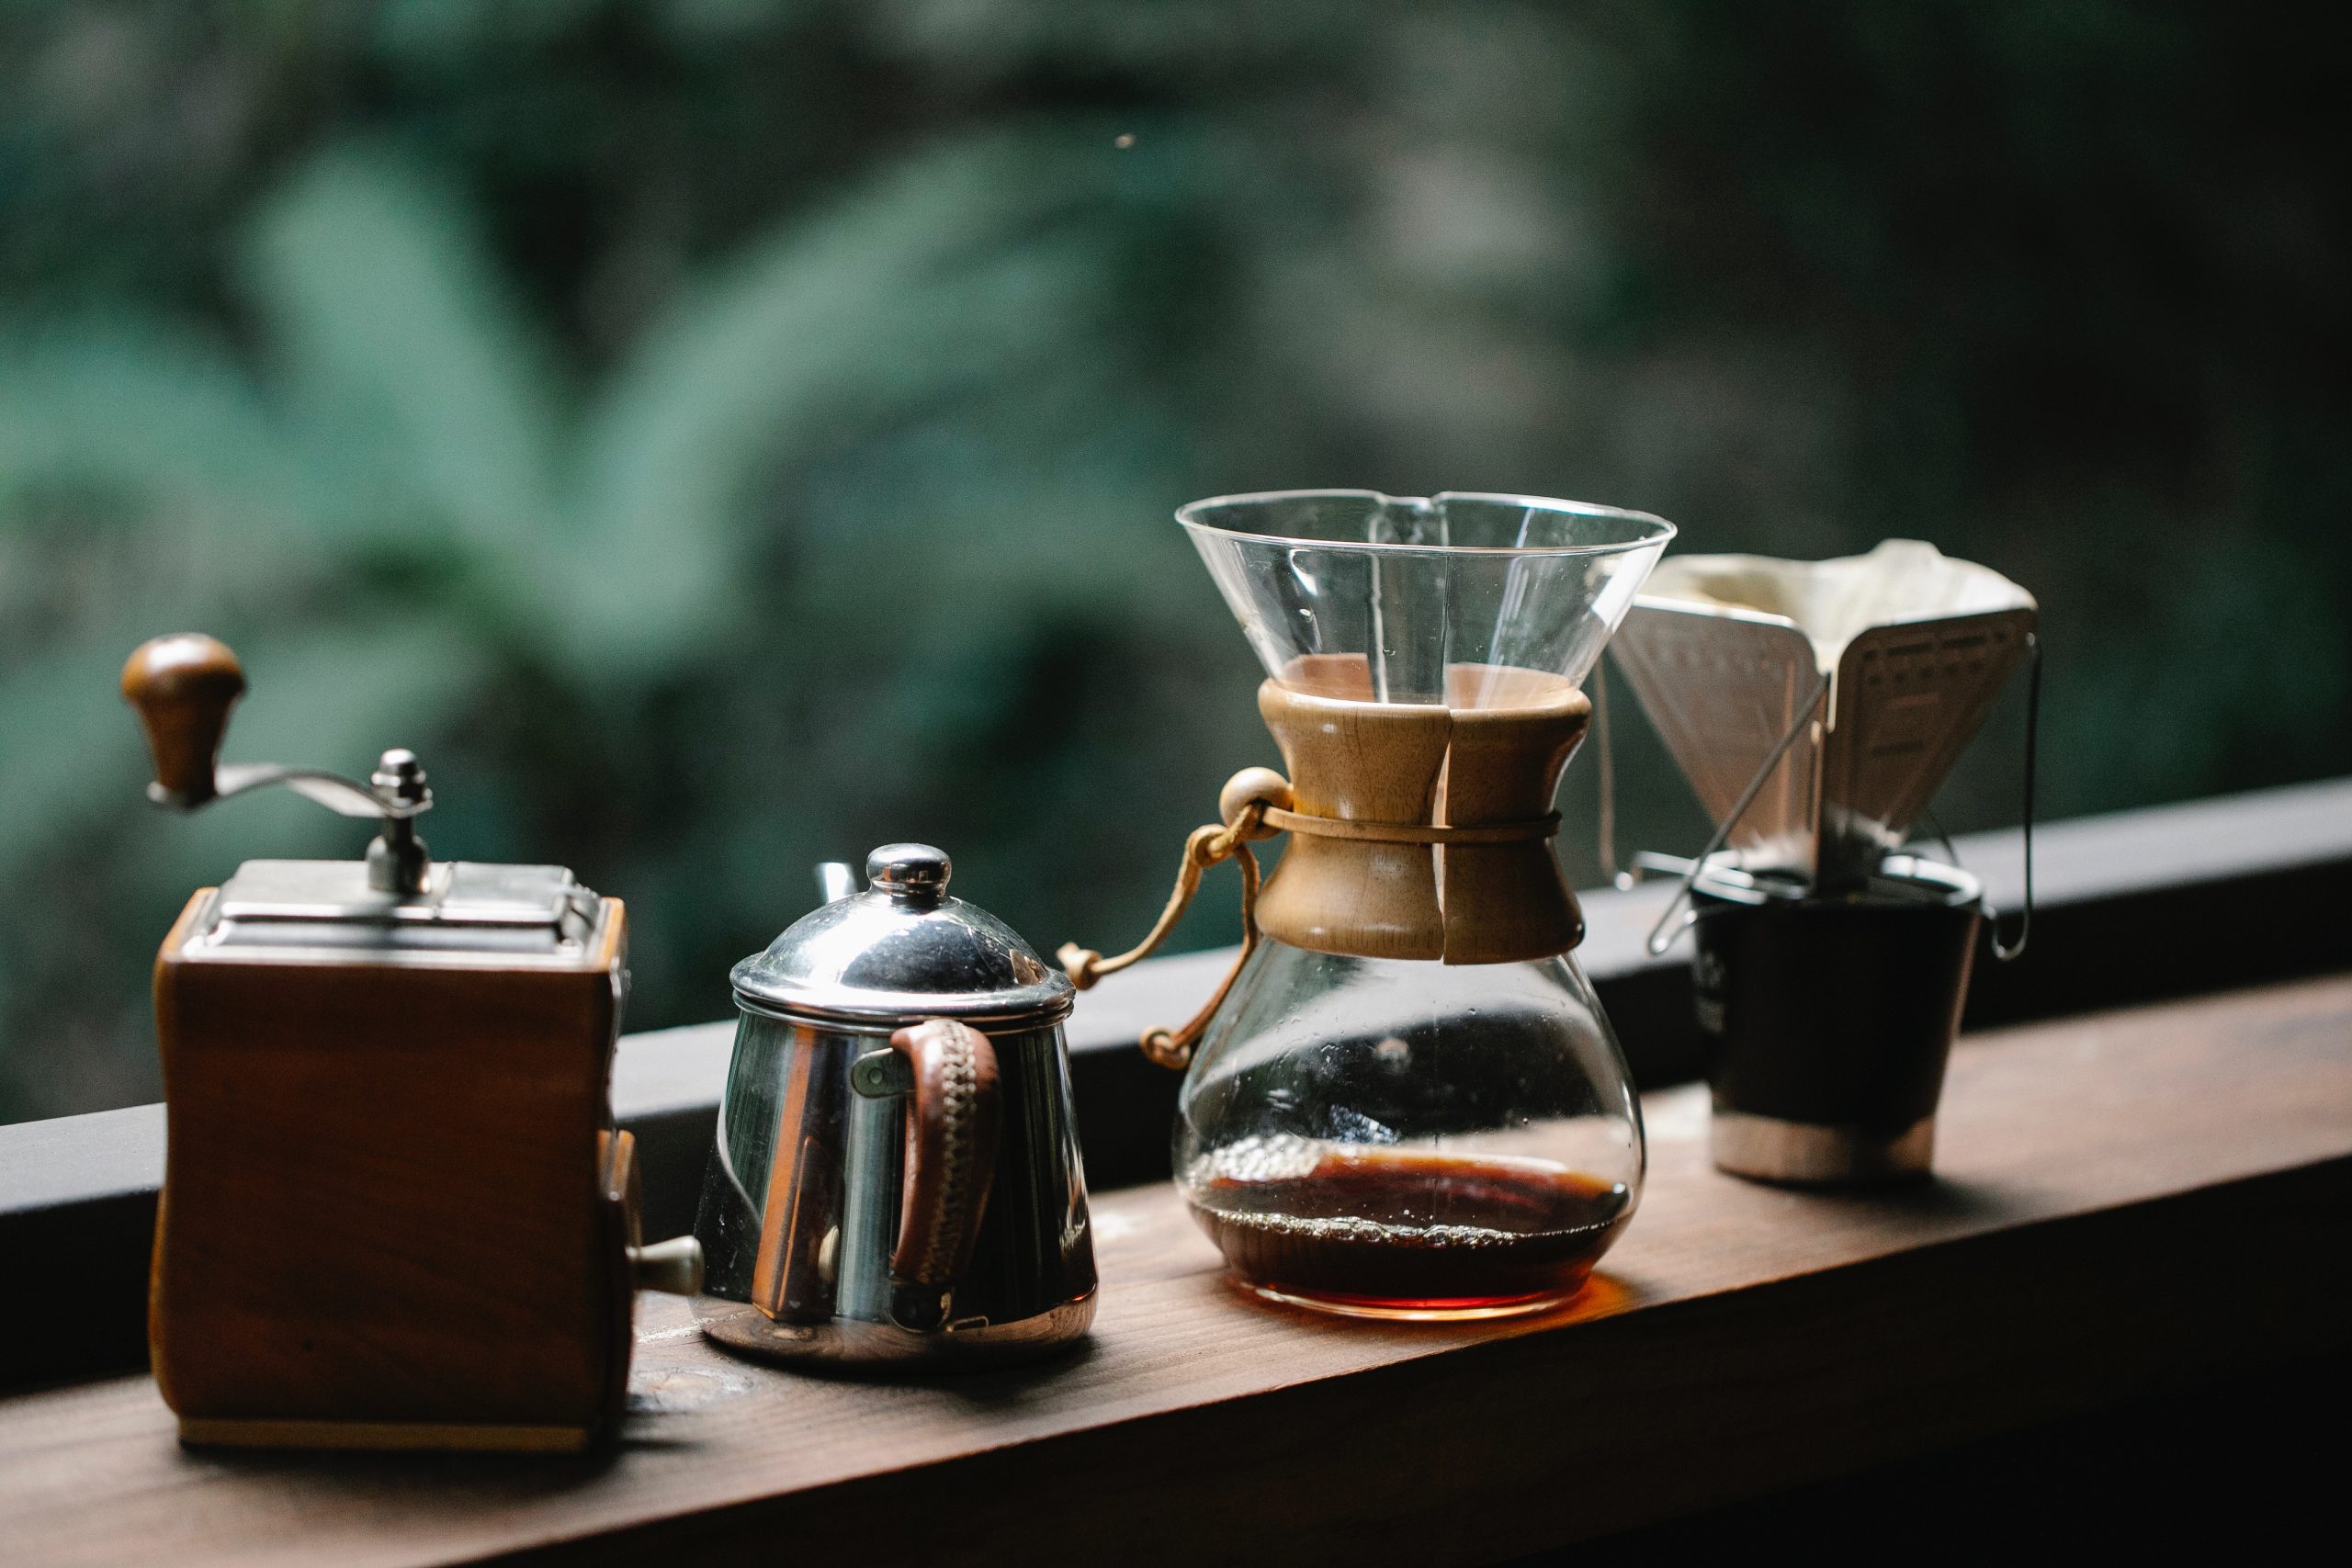 Deep Data Analysis for Better Quality Control
Photo by Michael Burrows: https://www.pexels.com/photo/chemex-coffeemaker-with-cup-placed-on-terrace-with-metal-kettle-and-hand-grinder-7125621/